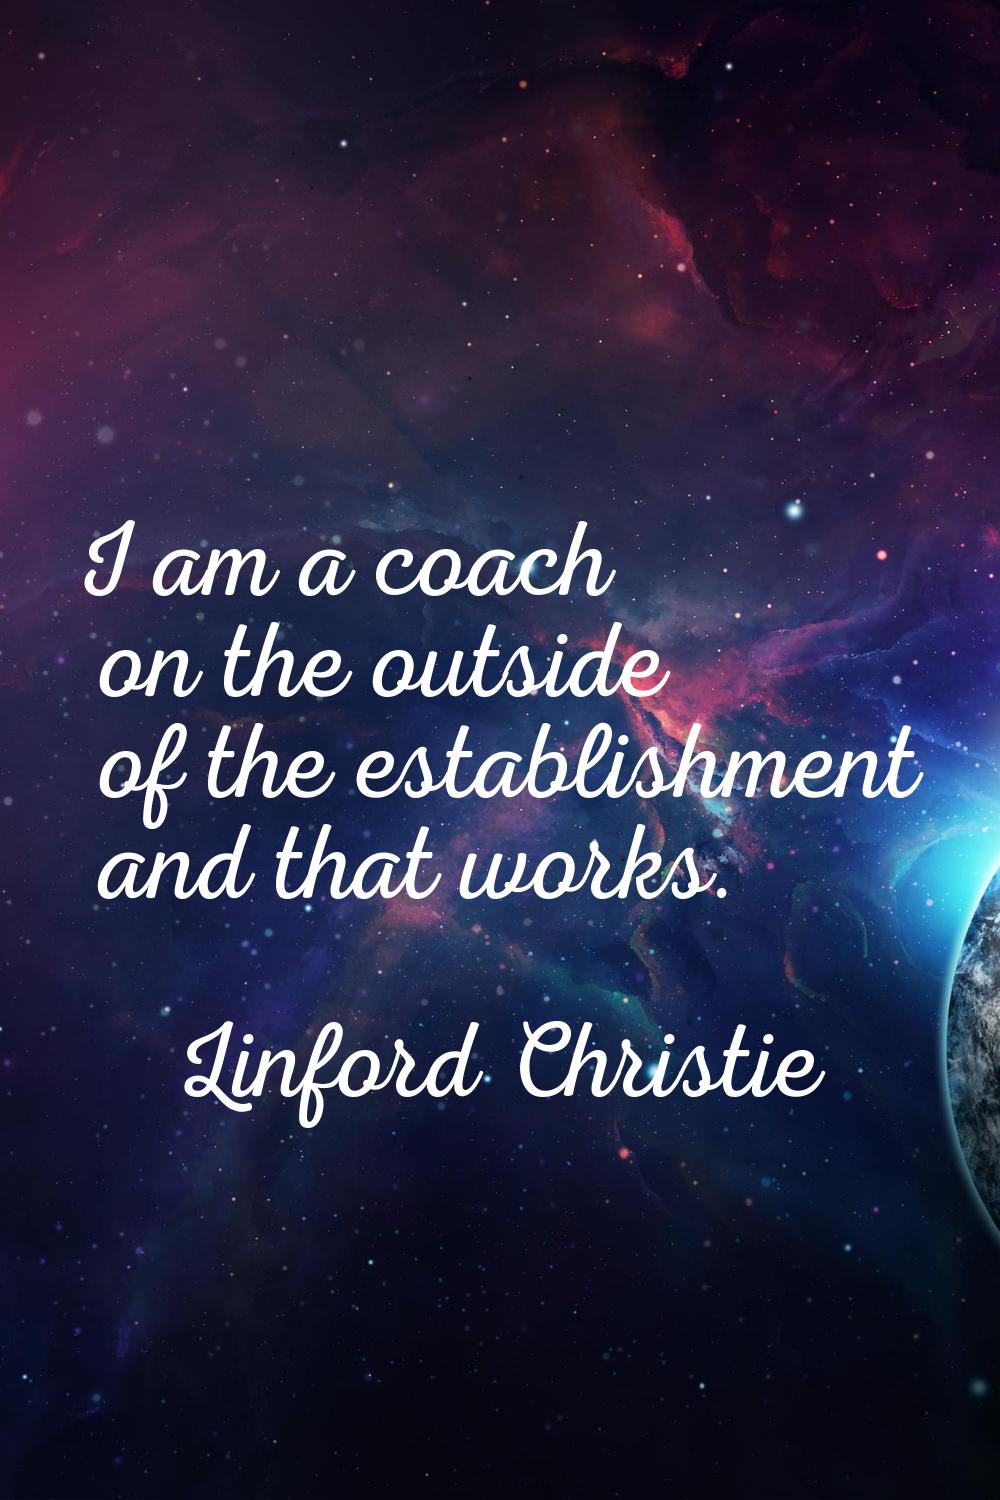 I am a coach on the outside of the establishment and that works.